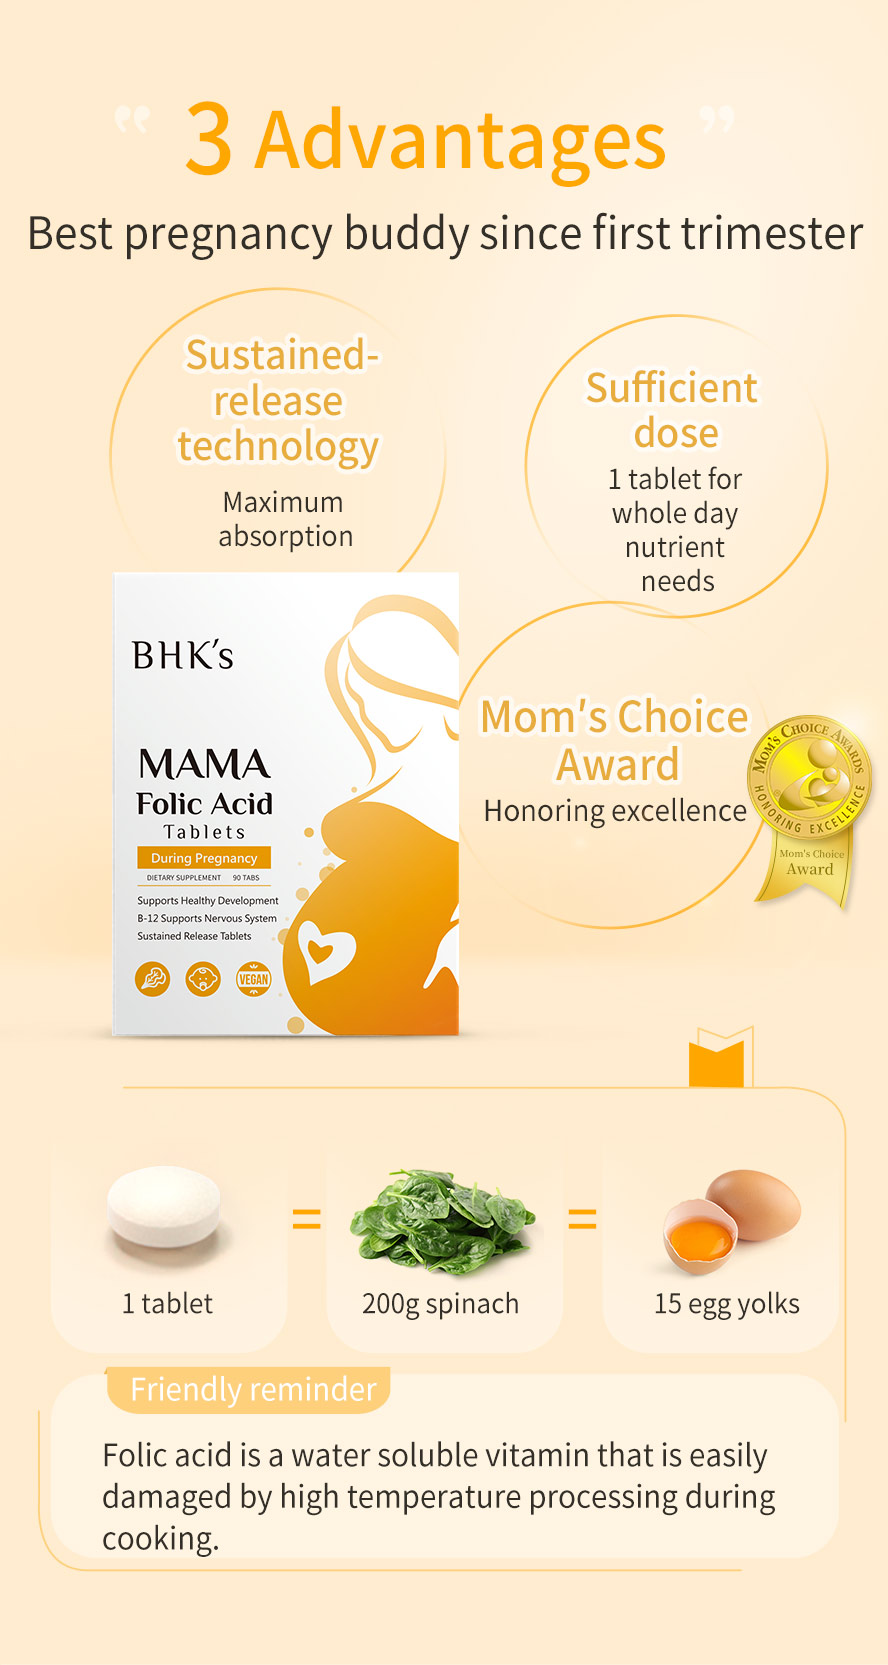 The best folic acid brand, to fulfill folic acid nutrient requirements, with sustained release technology tablet to enhance absorption